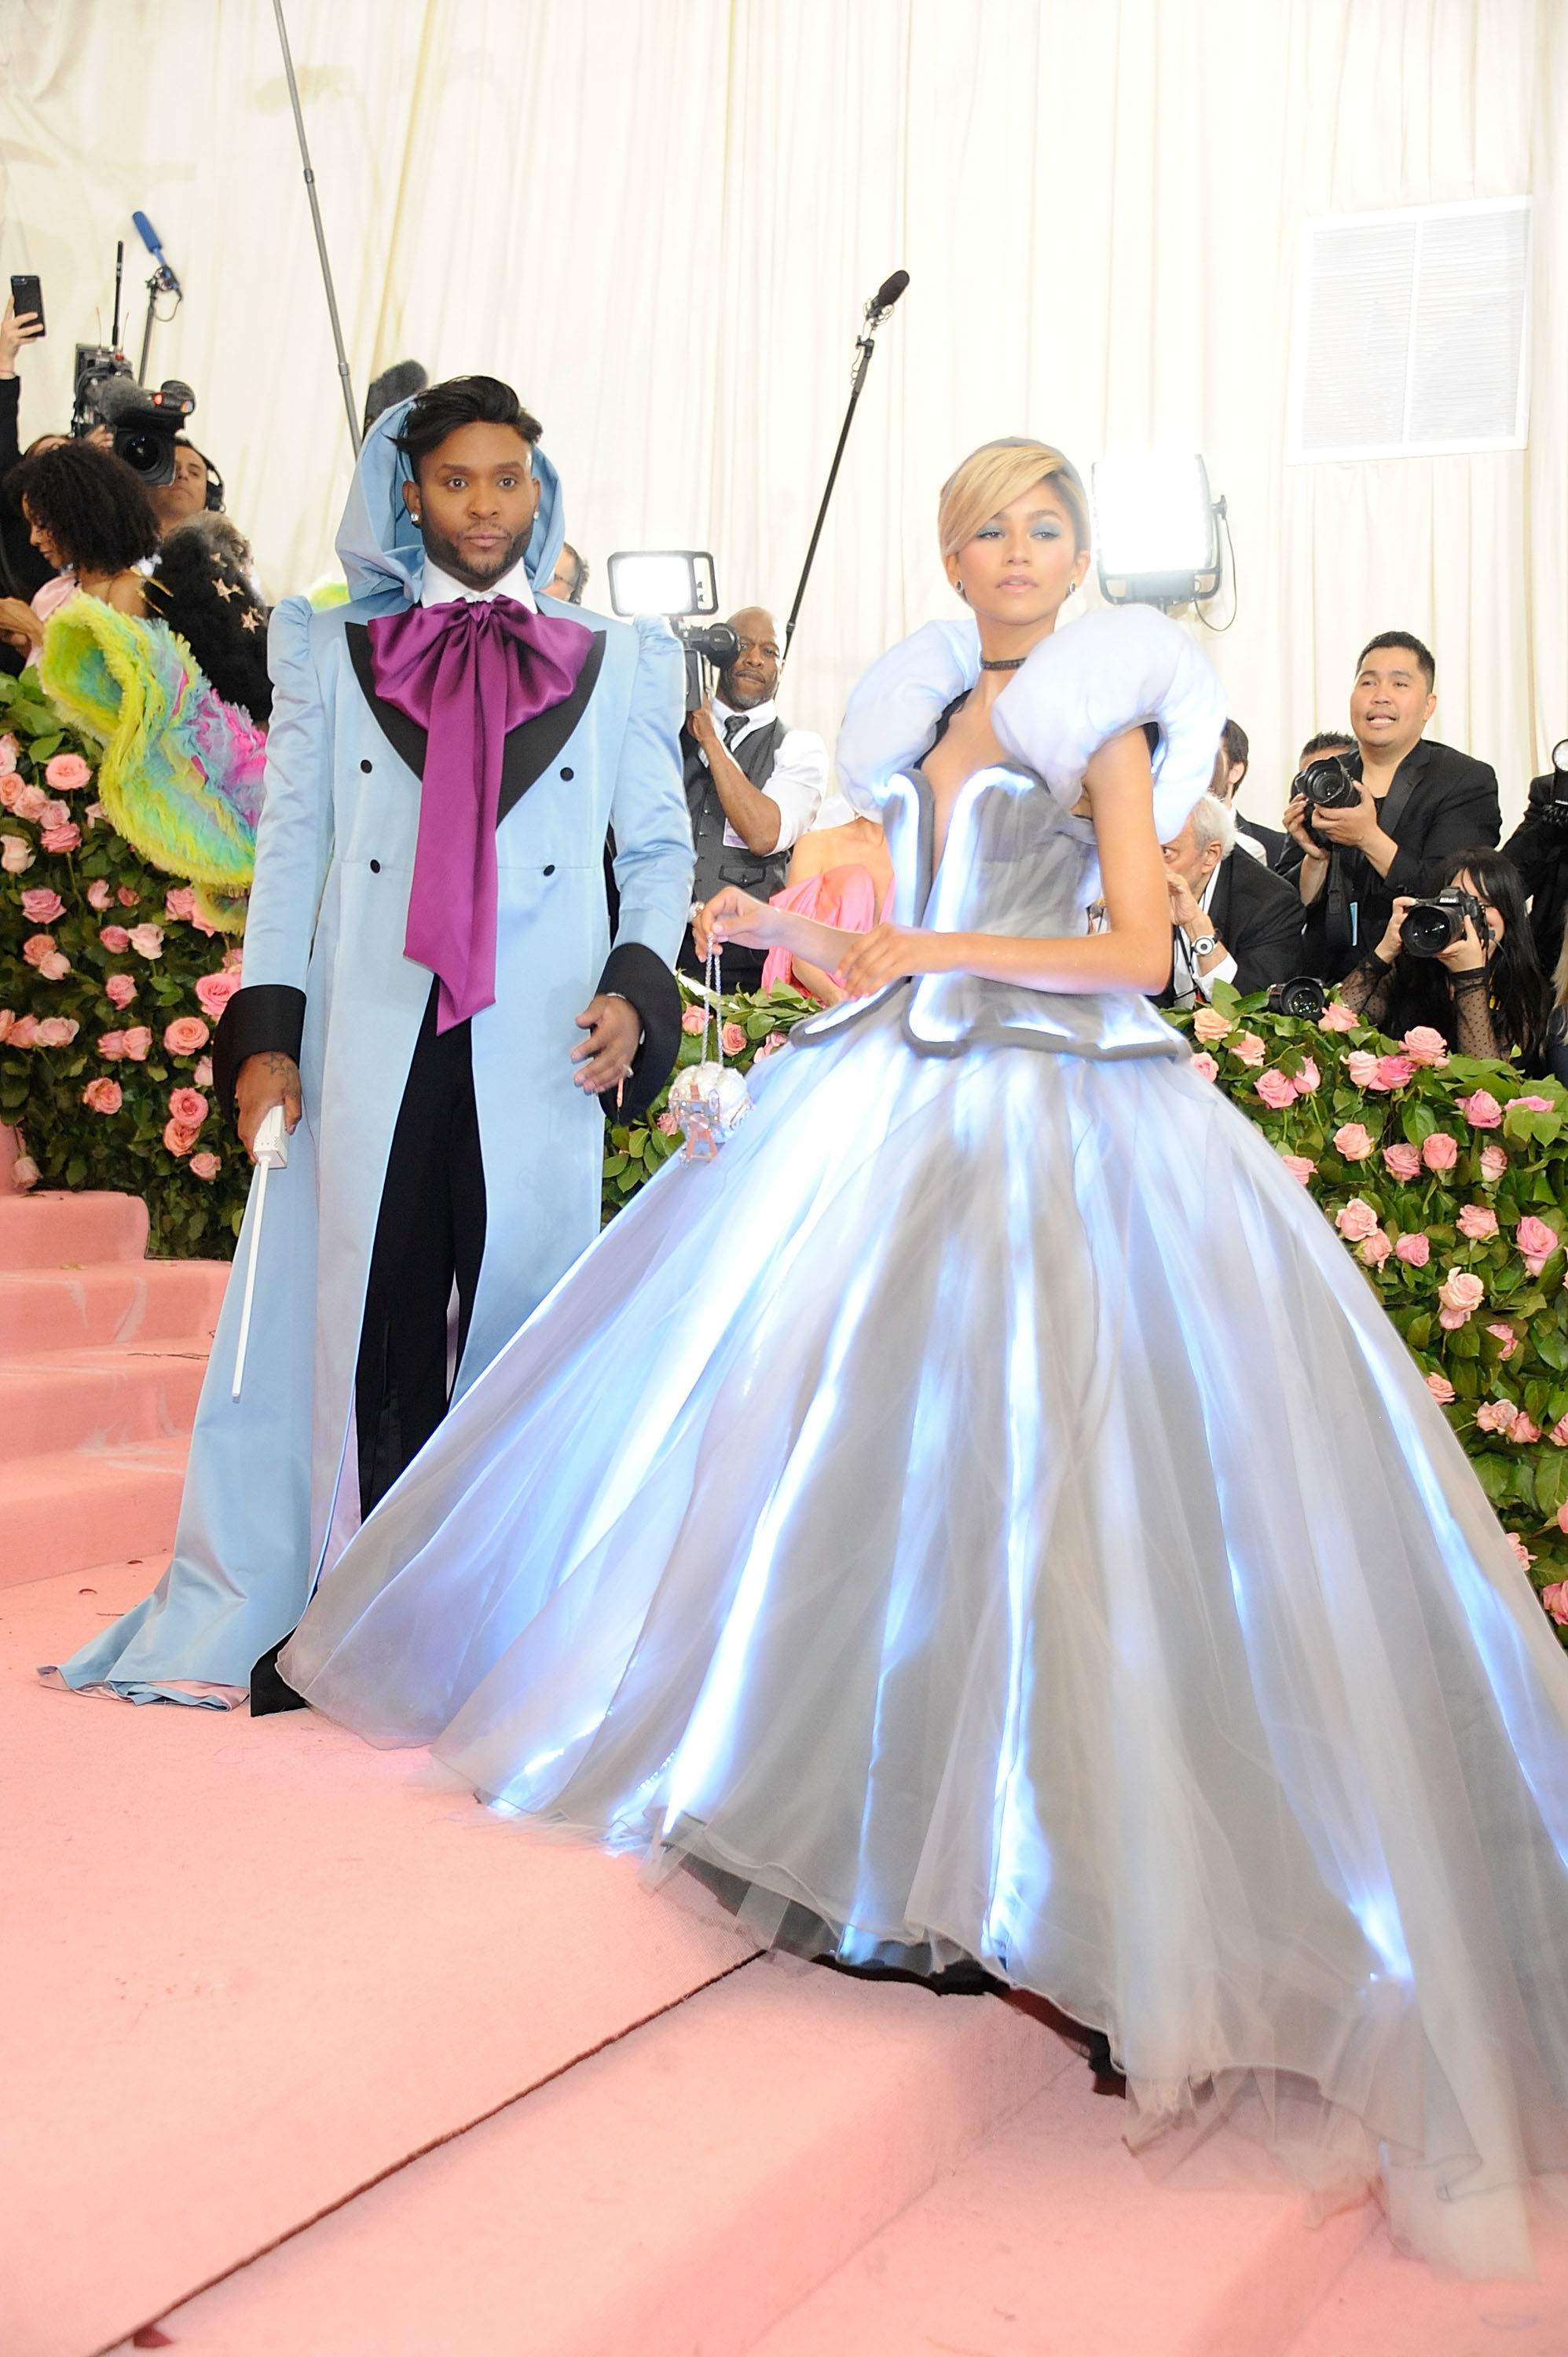 Law Roach (L) and Zendaya attend The 2019 Met Gala Celebrating Camp: Notes On Fashion - Arrivals at The Metropolitan Museum of Art on May 6, 2019 in New York City